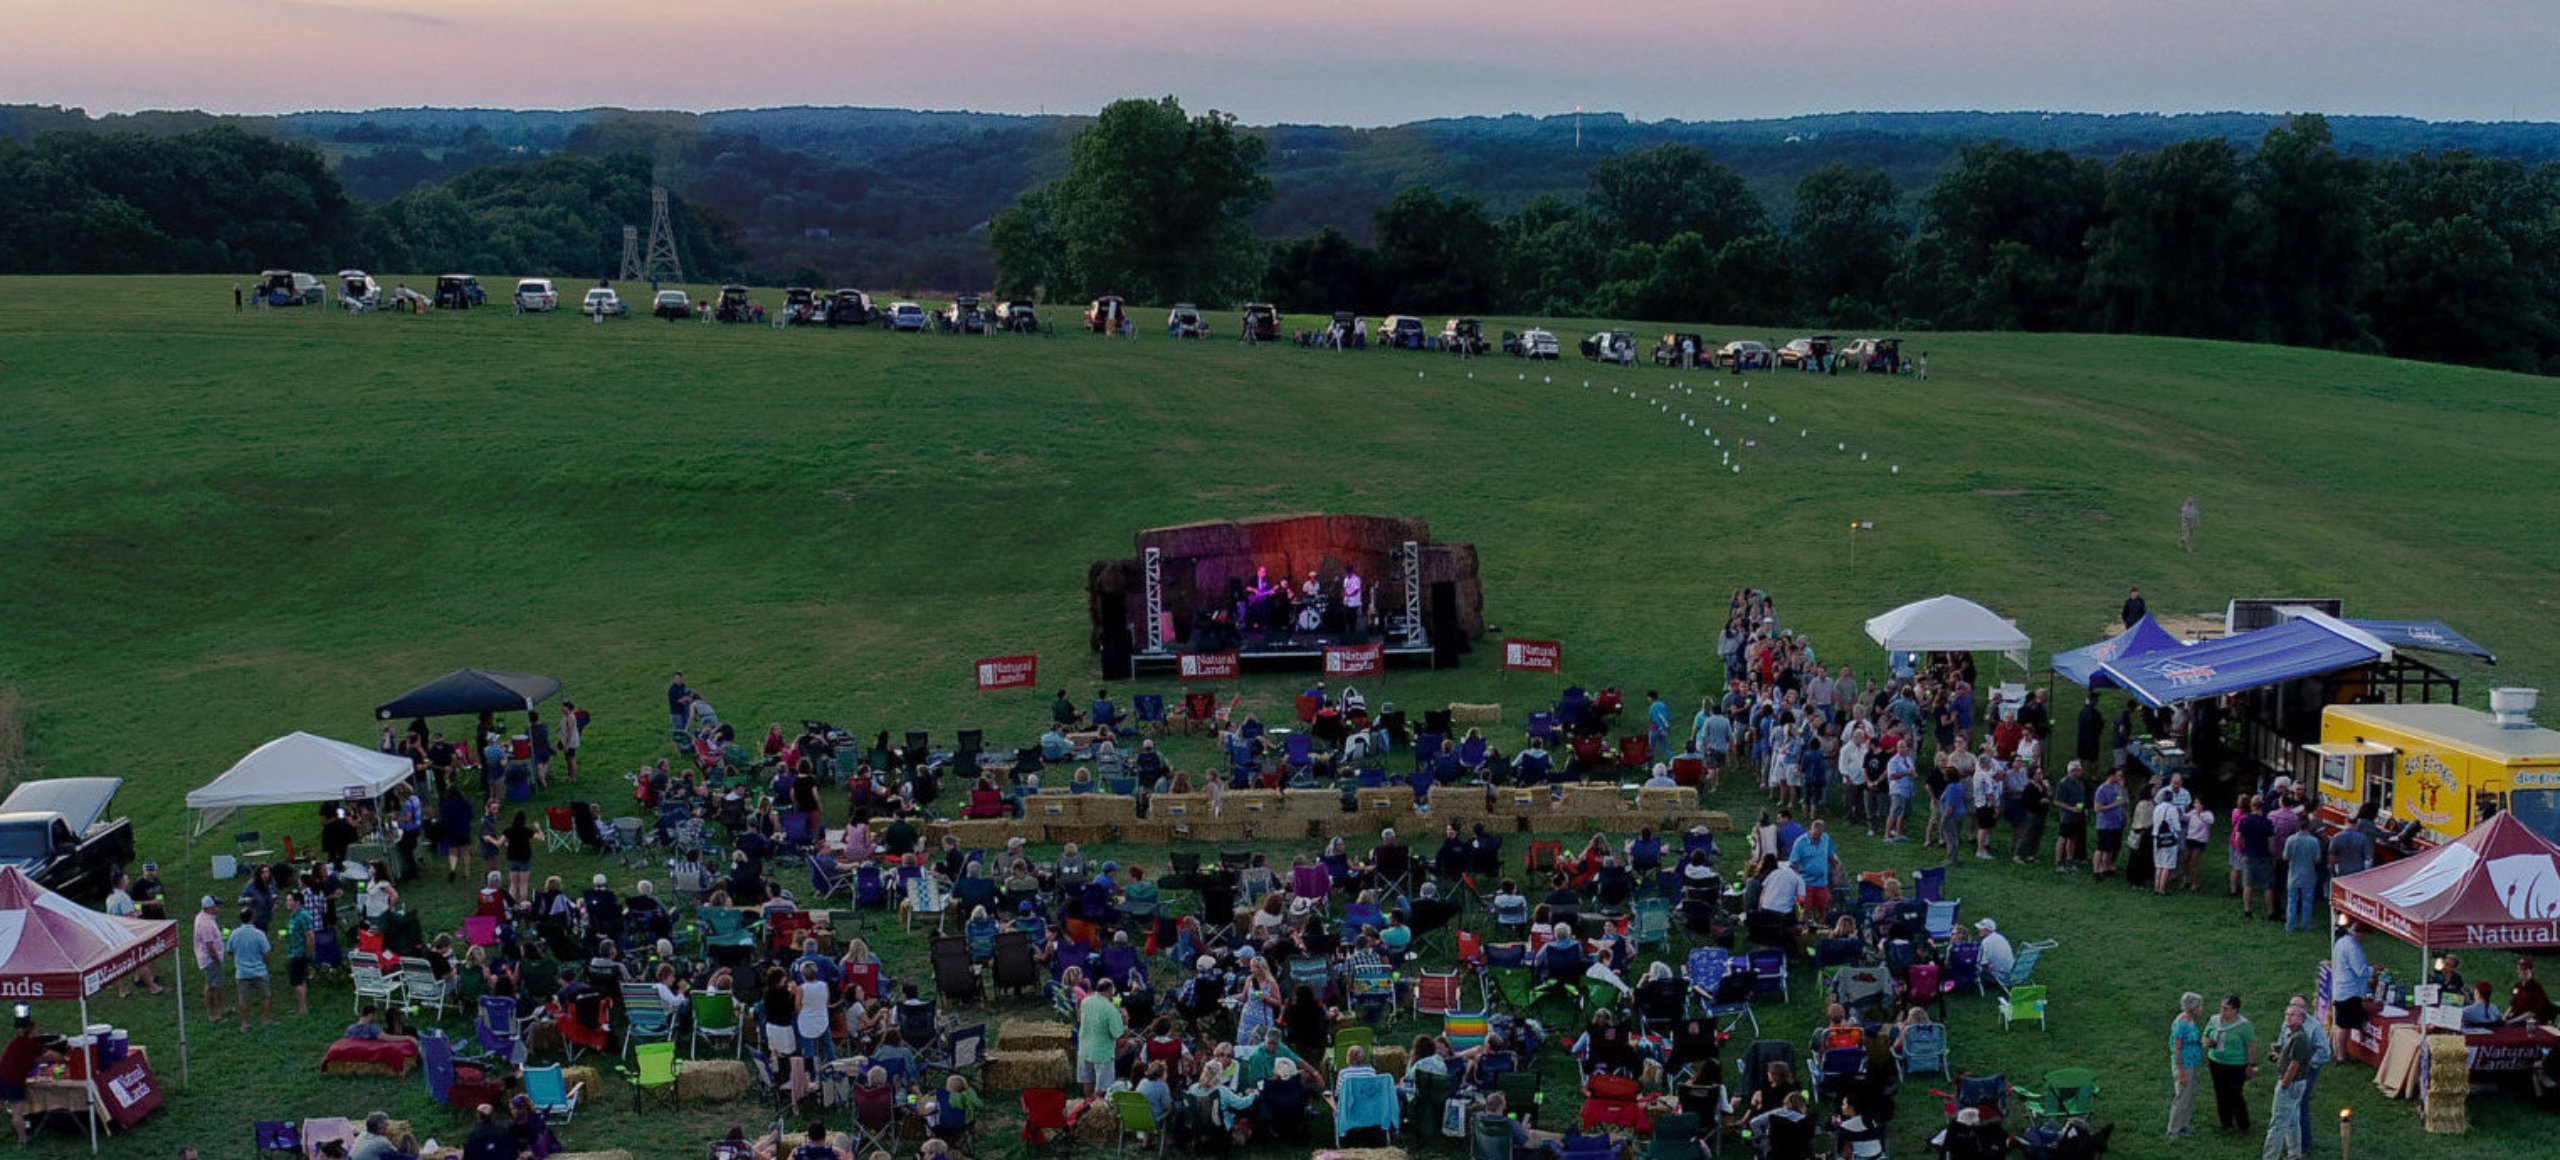 A drone shot of an outdoors concert where the audience sits on champing chairs in a green field during sunset.